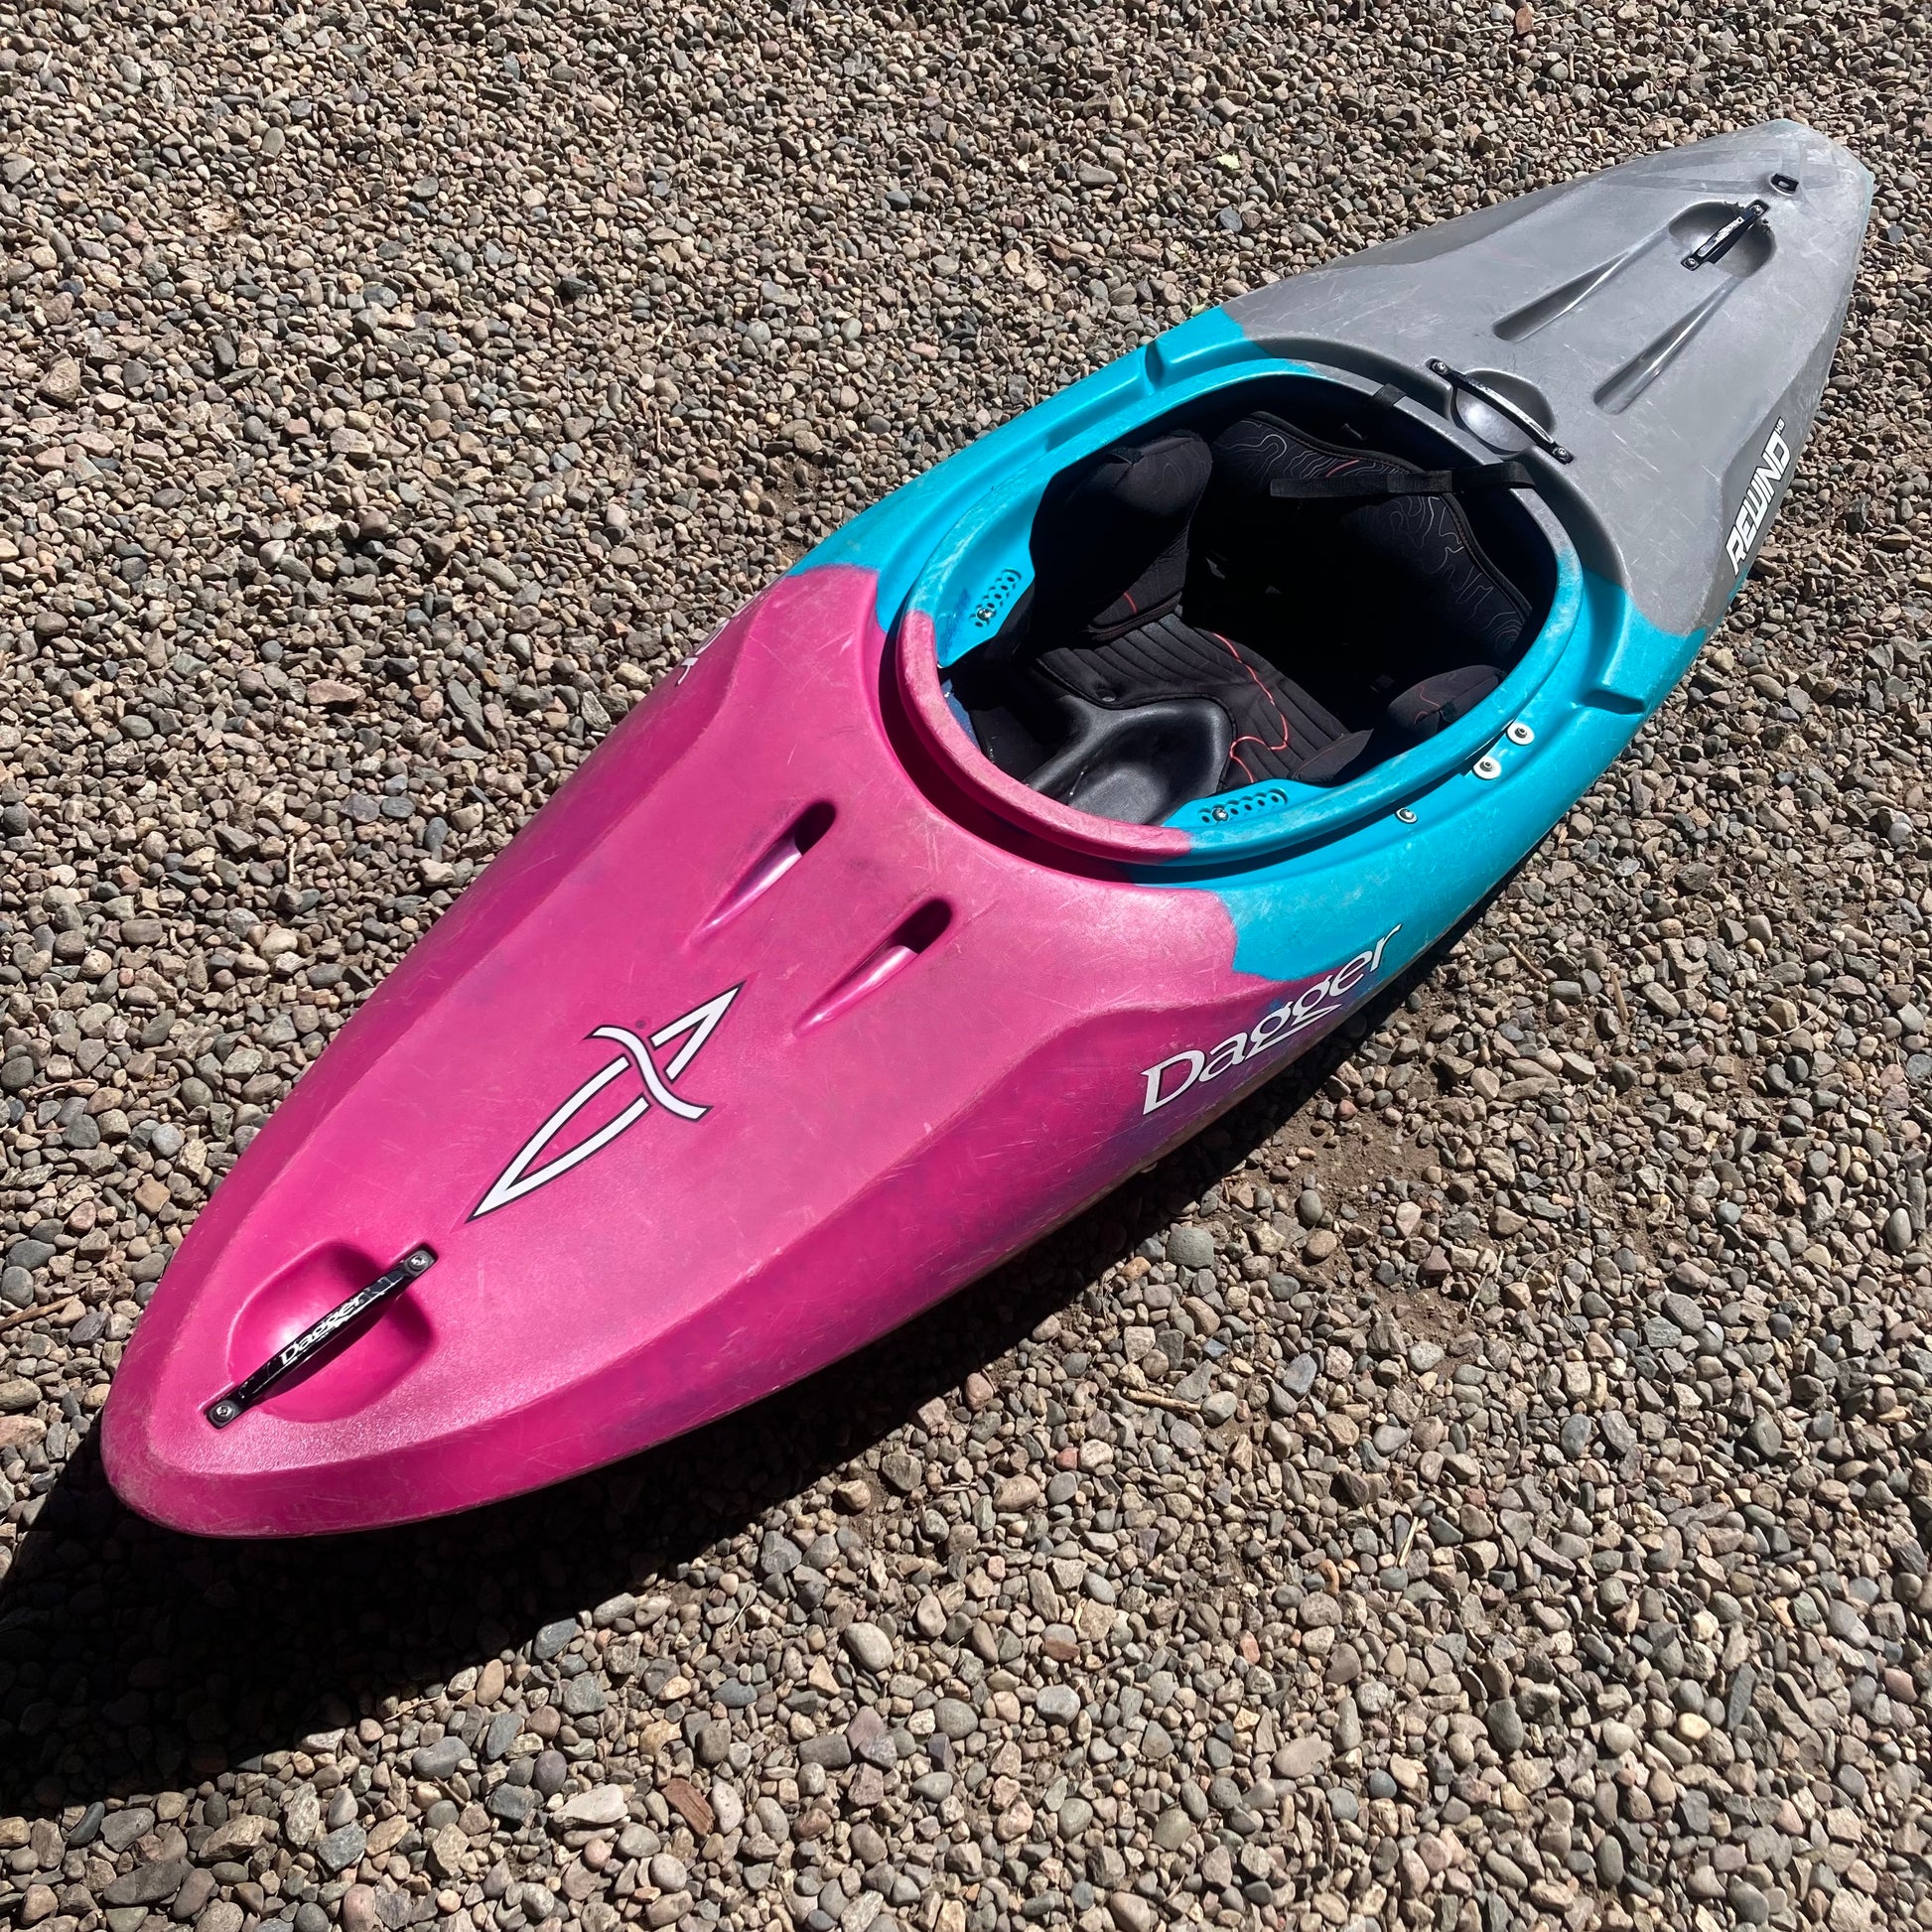 A pink and blue Demo Rewind XS kayak laying on the ground. (Brand Name: Dagger)